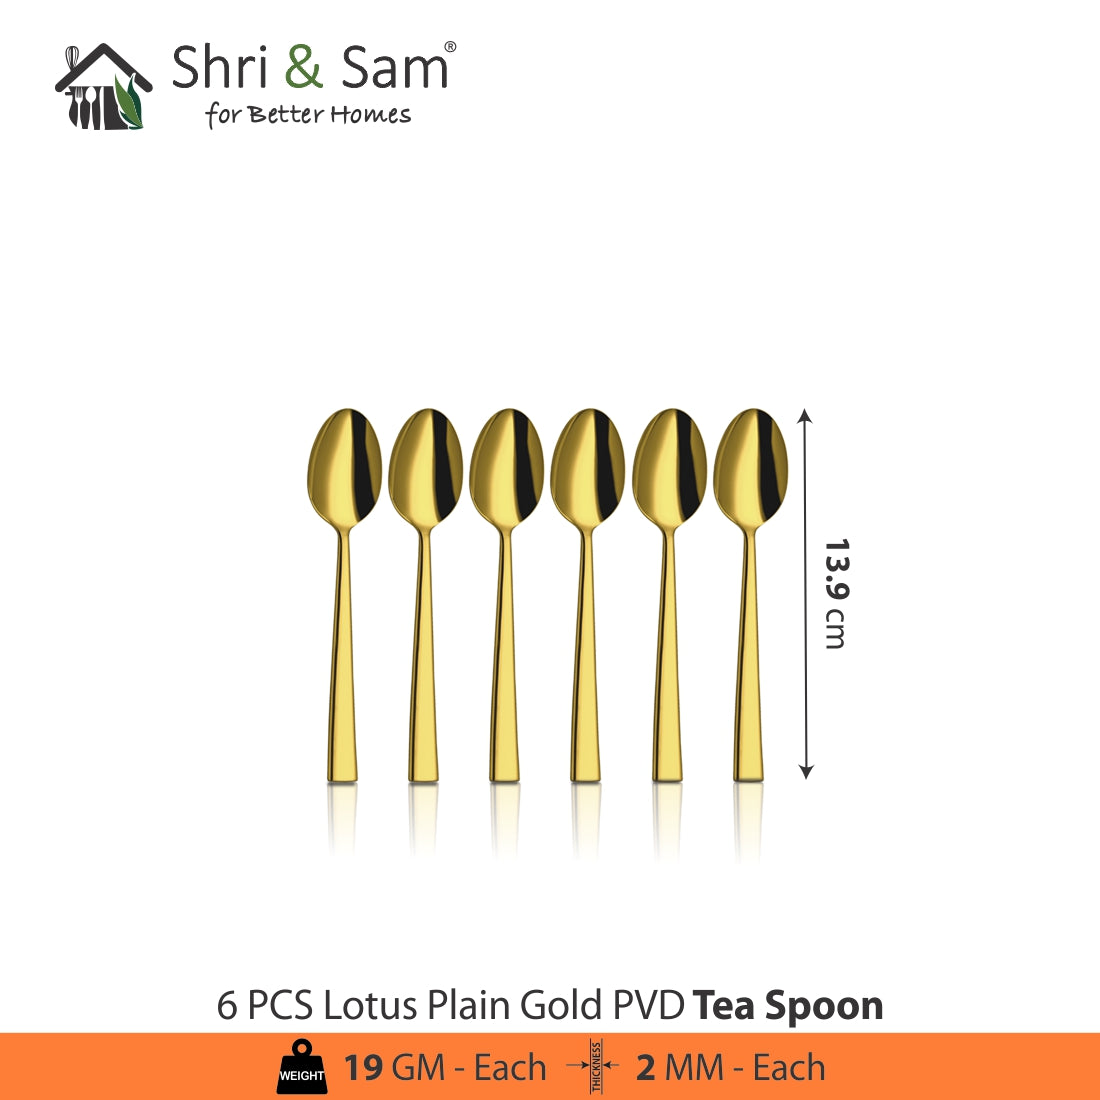 Stainless Steel Cutlery with Gold PVD Coating Lotus Plain